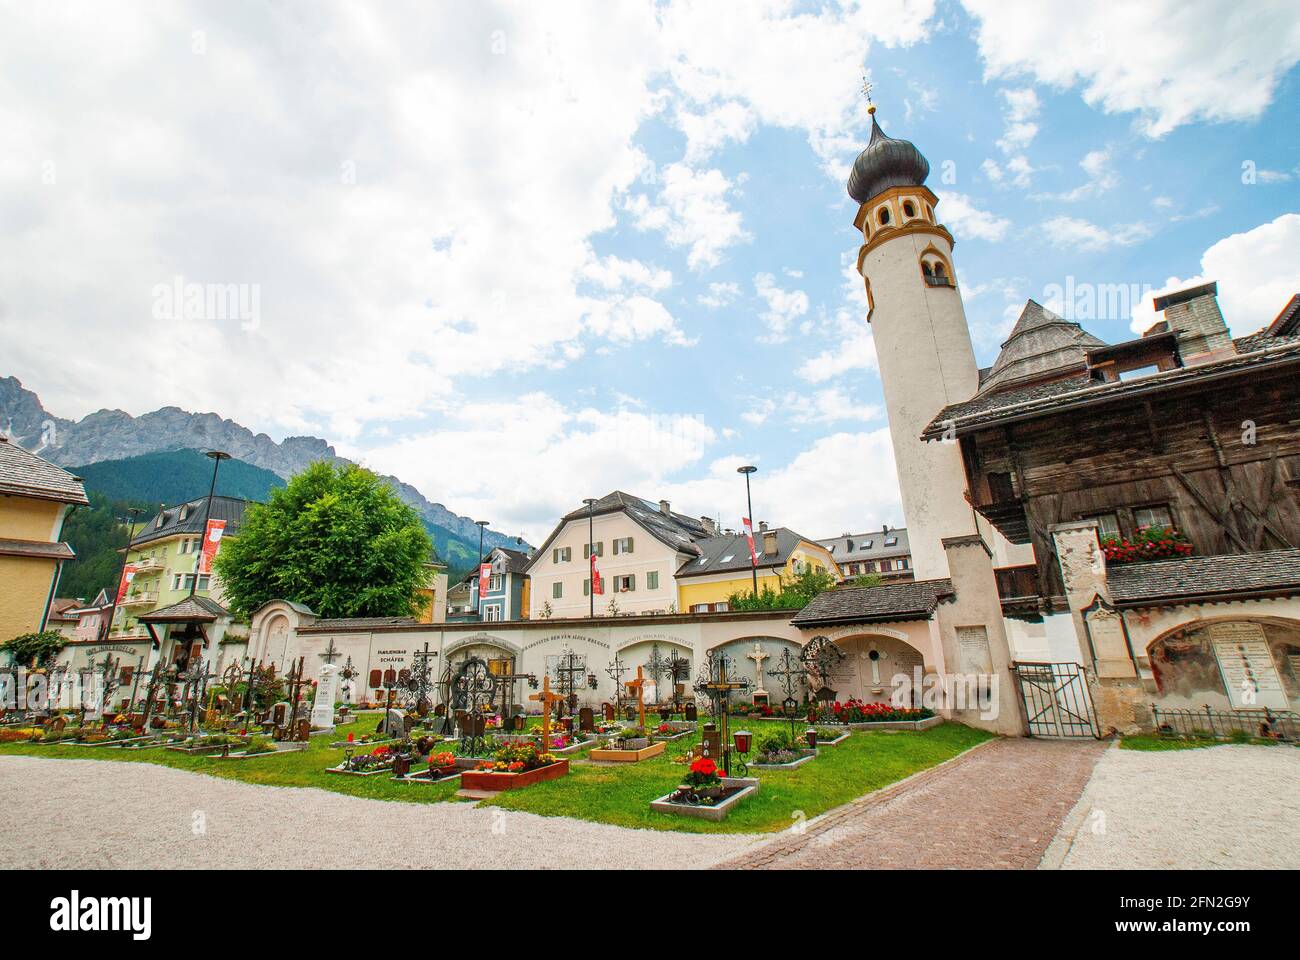 The bell tower of the Church of San Michele from the Graveyard of the Collegiate Church of San Candido, San Candido, Dolomites, Italy, Val Pusteria Stock Photo